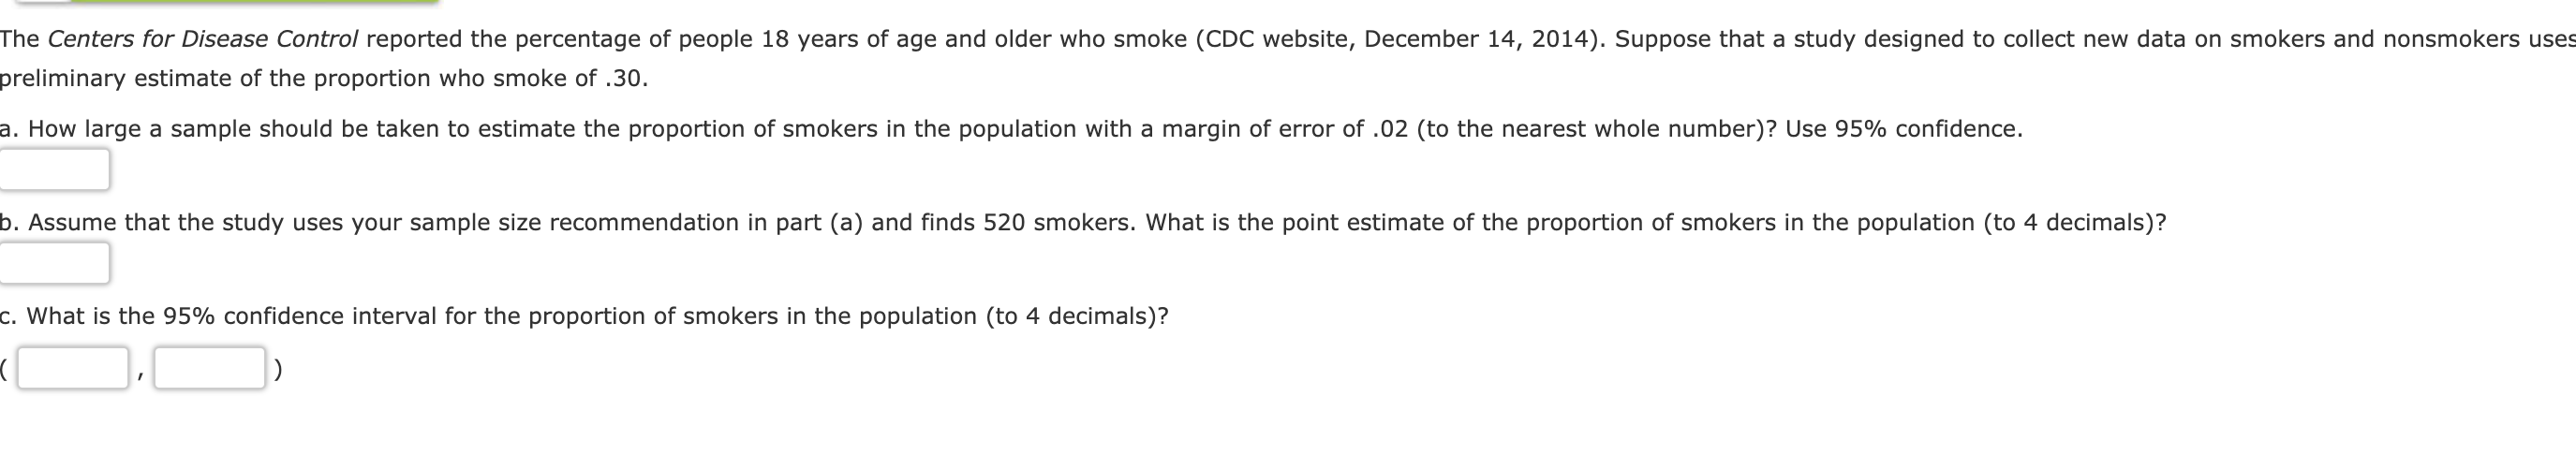 The Centers for Disease Control reported the percentage of people 18 years of age and older who smoke (CDC website, December 14, 2014). Suppose that a study designed to collect new data on smokers and nonsmokers uses
preliminary estimate of the proportion who smoke of .30.
a. How large a sample should be taken to estimate the proportion of smokers in the population with a margin of error of .02 (to the nearest whole number)? Use 95% confidence
b. Assume that the study uses your sample size recommendation in part (a) and finds 520 smokers. What is the point estimate of the proportion of smokers in the population (to 4 decimals)?
C. what is the 95% confidence interval for the proportion of smokers in the population (to 4 decimals)?
